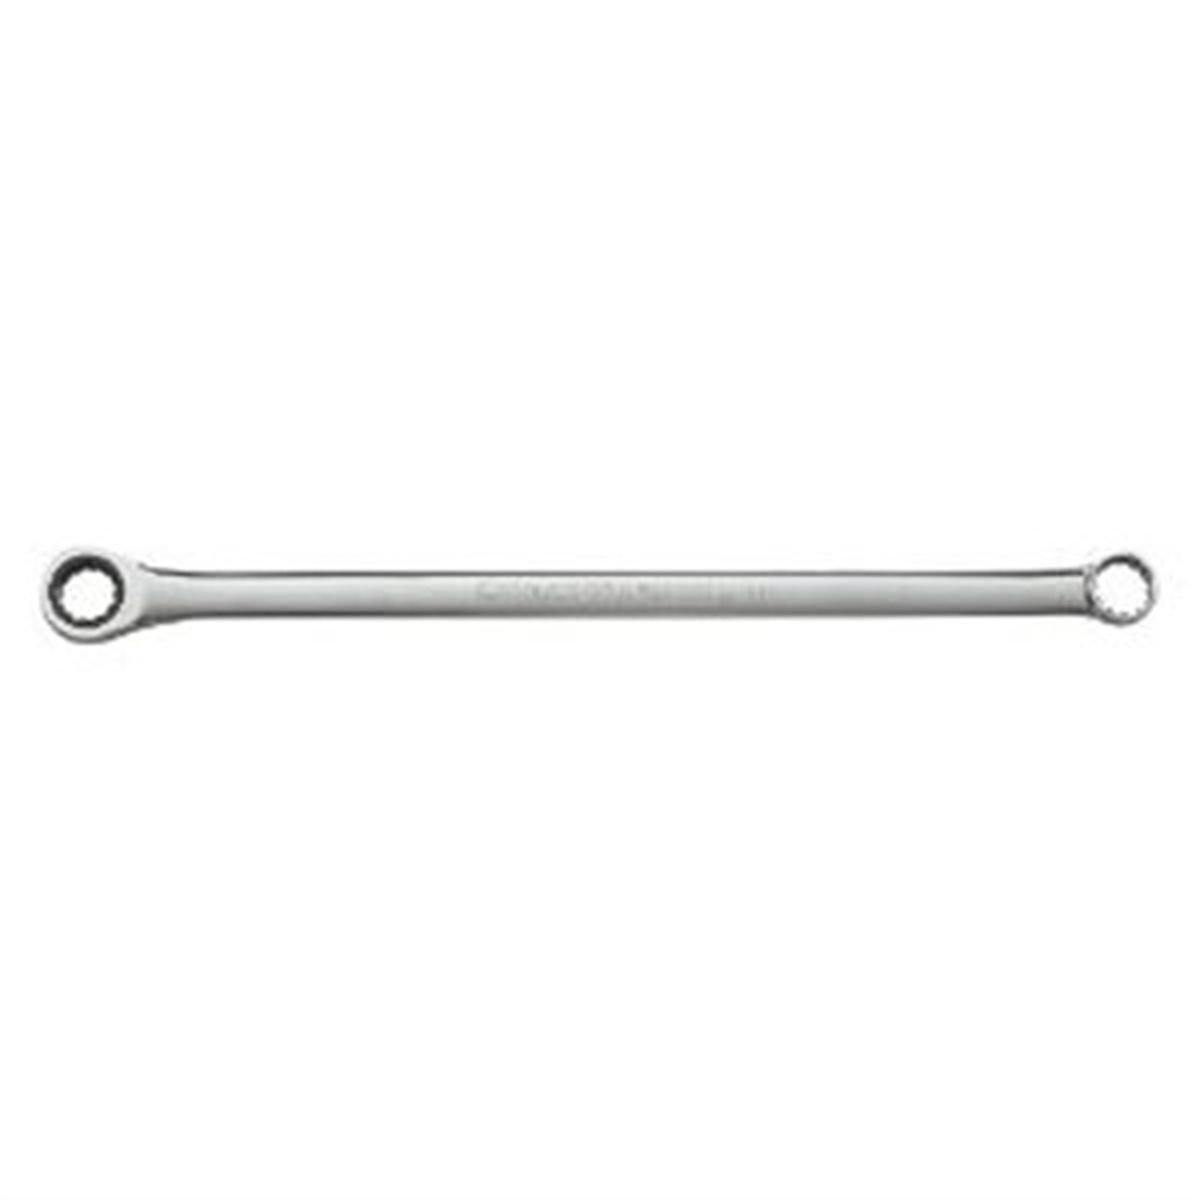 XL GearBox Double Box Ratcheting Wrench 7/16 Inch